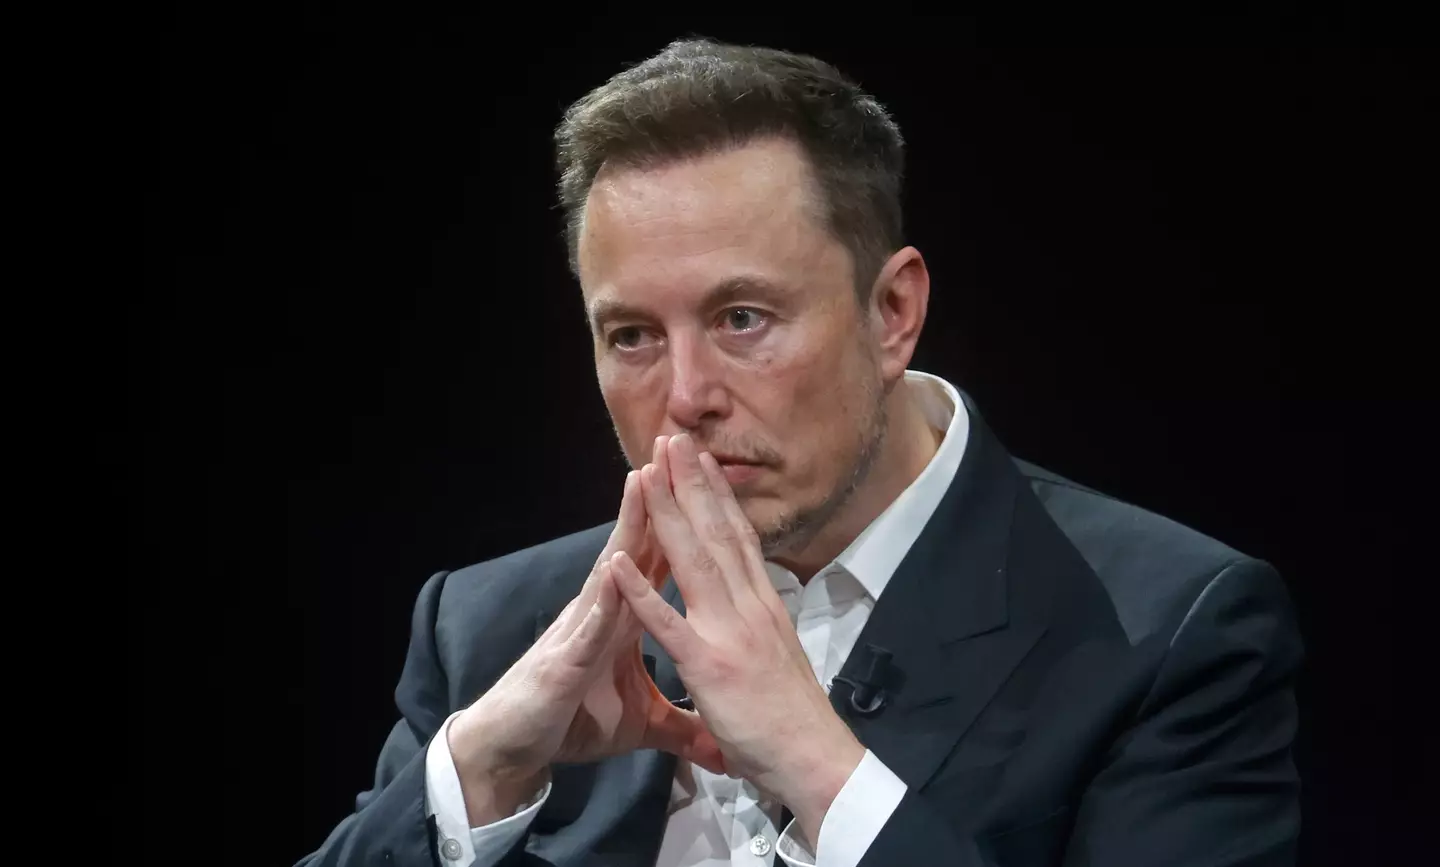 Elon Musk's biographer claims he is devastated by the lack of contact with his eldest daughter.